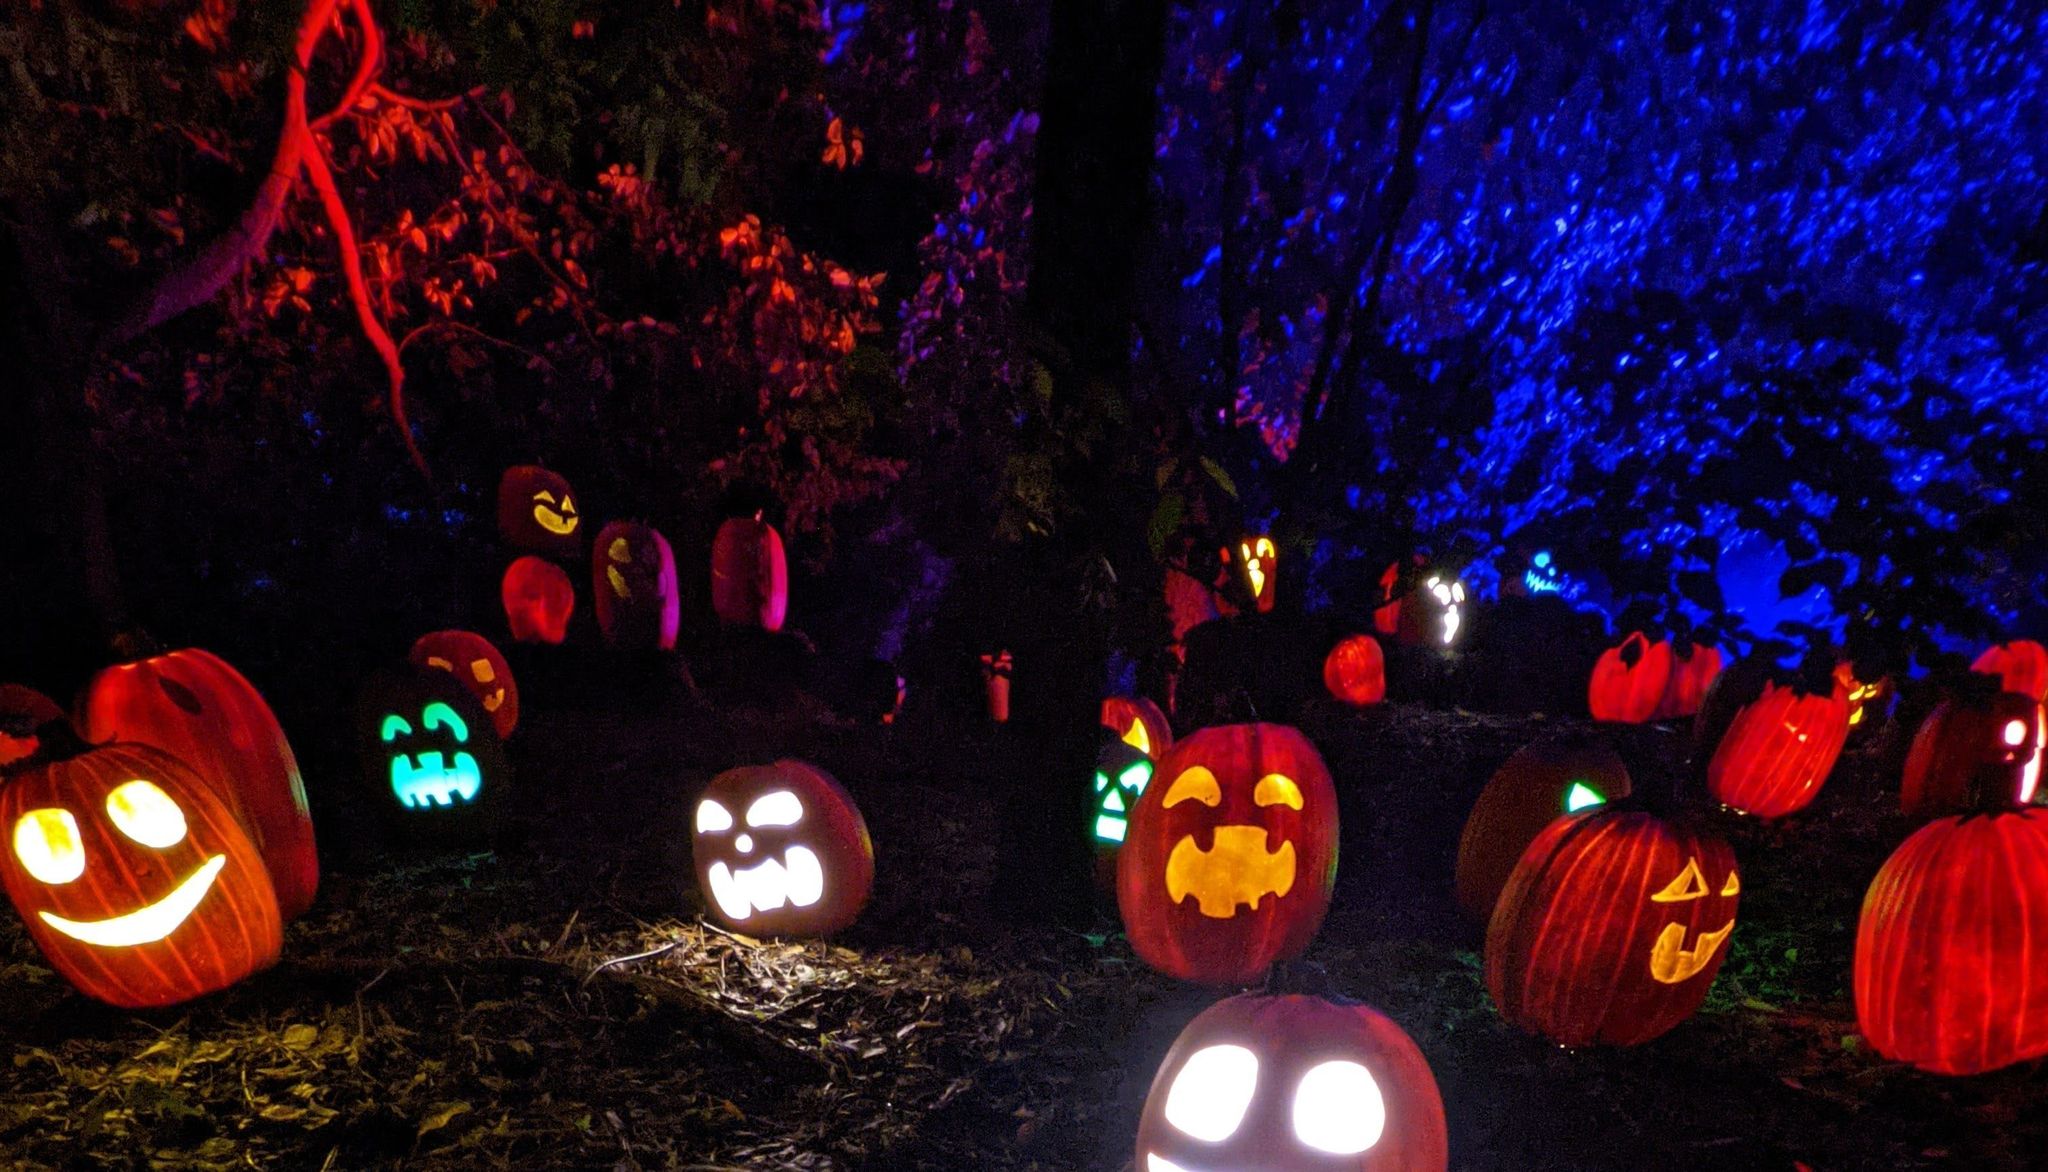 Picture of multiple jack o lanterns under blue and red lights